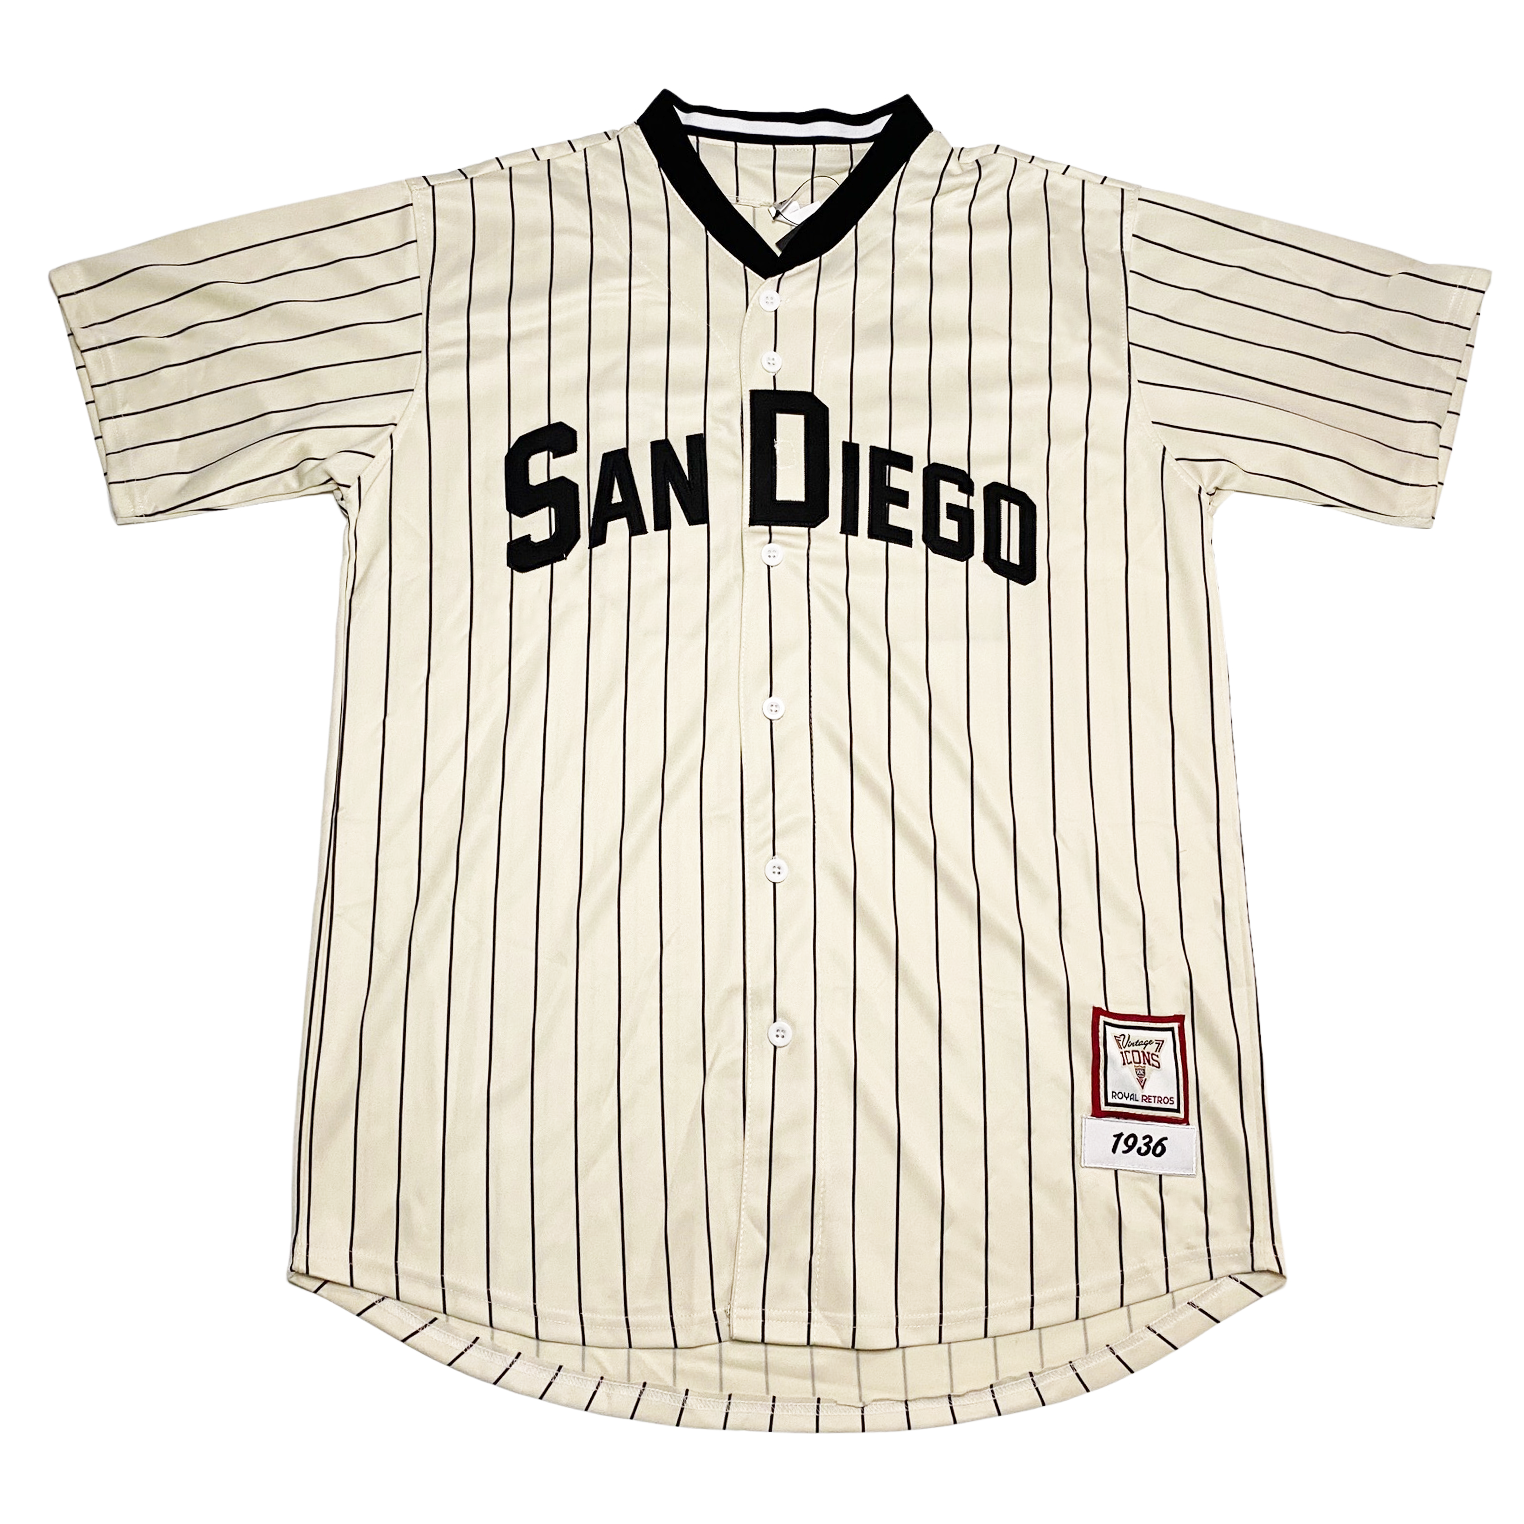 Tales from the Dream Shop: Restoring a 1979 Padres Jersey